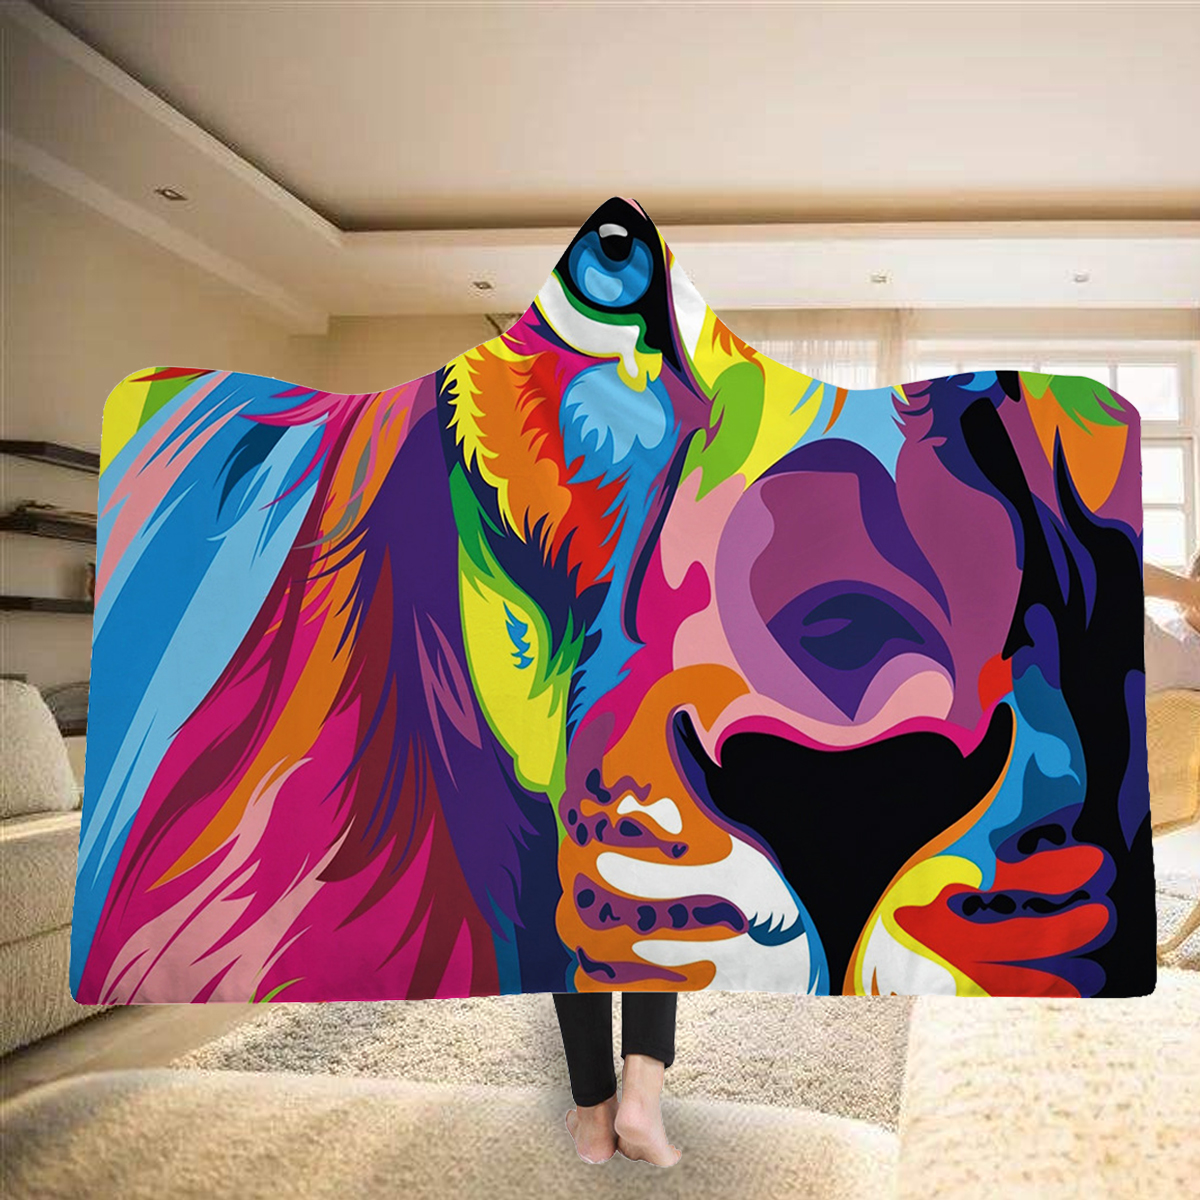 Hooded-Blankets-Lion-Colorful-Printed-Warm-Wearable-Plush-Mat-Thick-Nap-Soft-Blanke-1400297-5